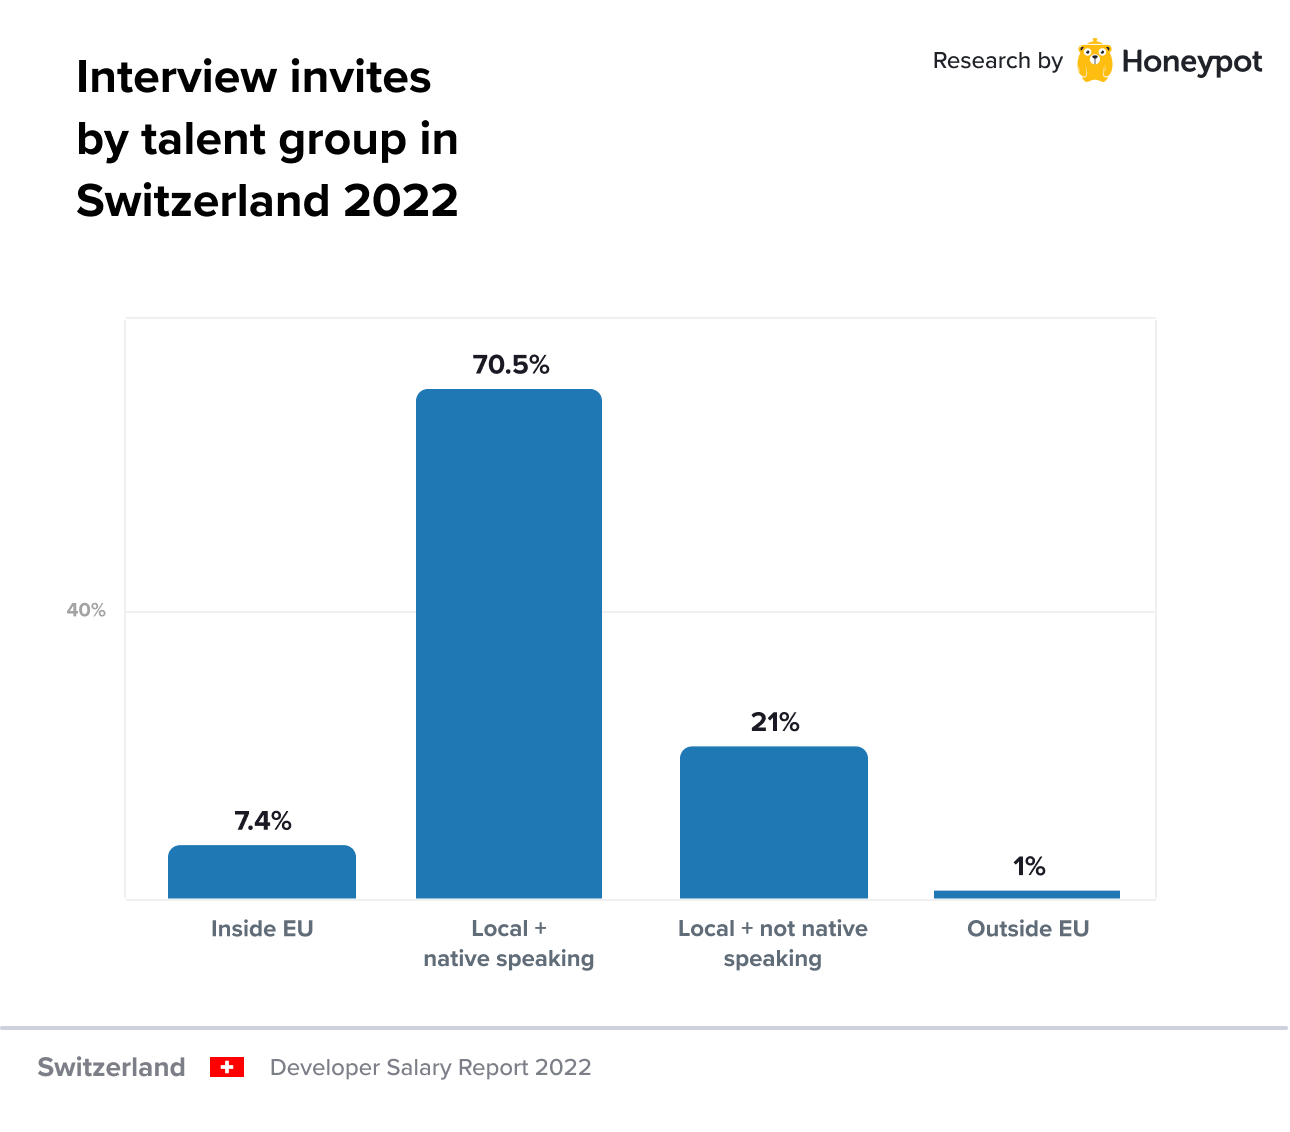 Interview invites by talent group in Switzerland 2022